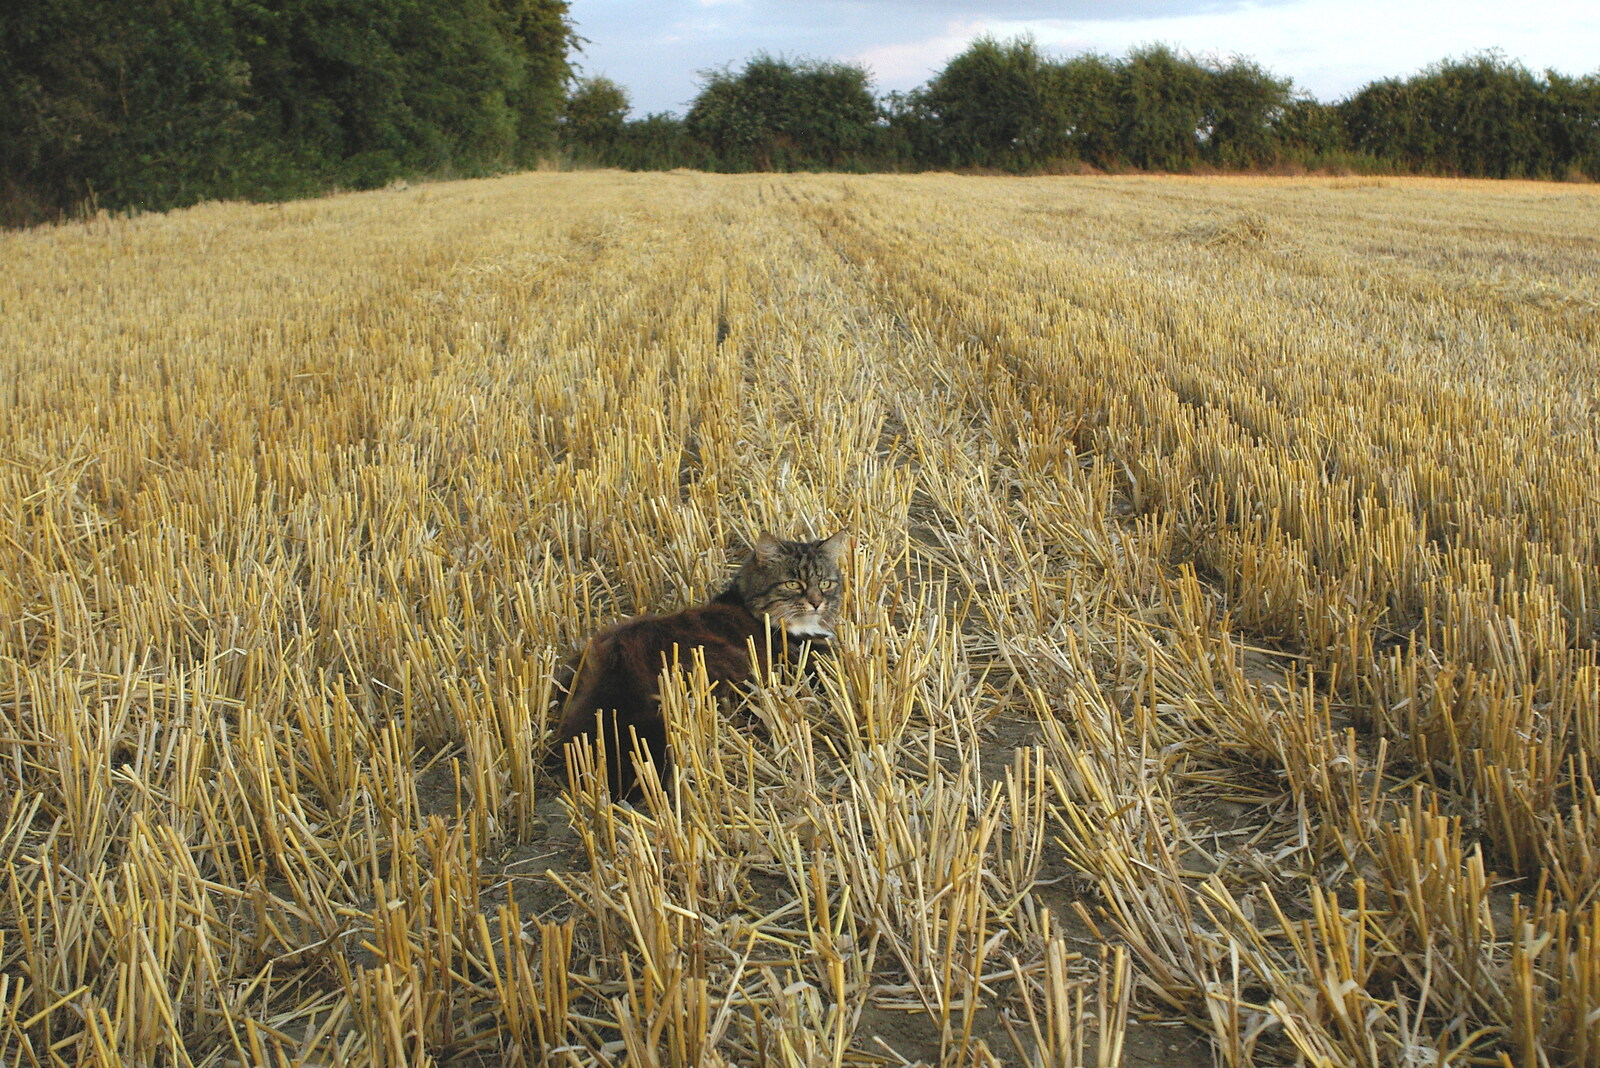 Sophie roams around the stubble from Mother and Mike Visit, and Cat Photos, Brome, Suffolk - 1st September 2002